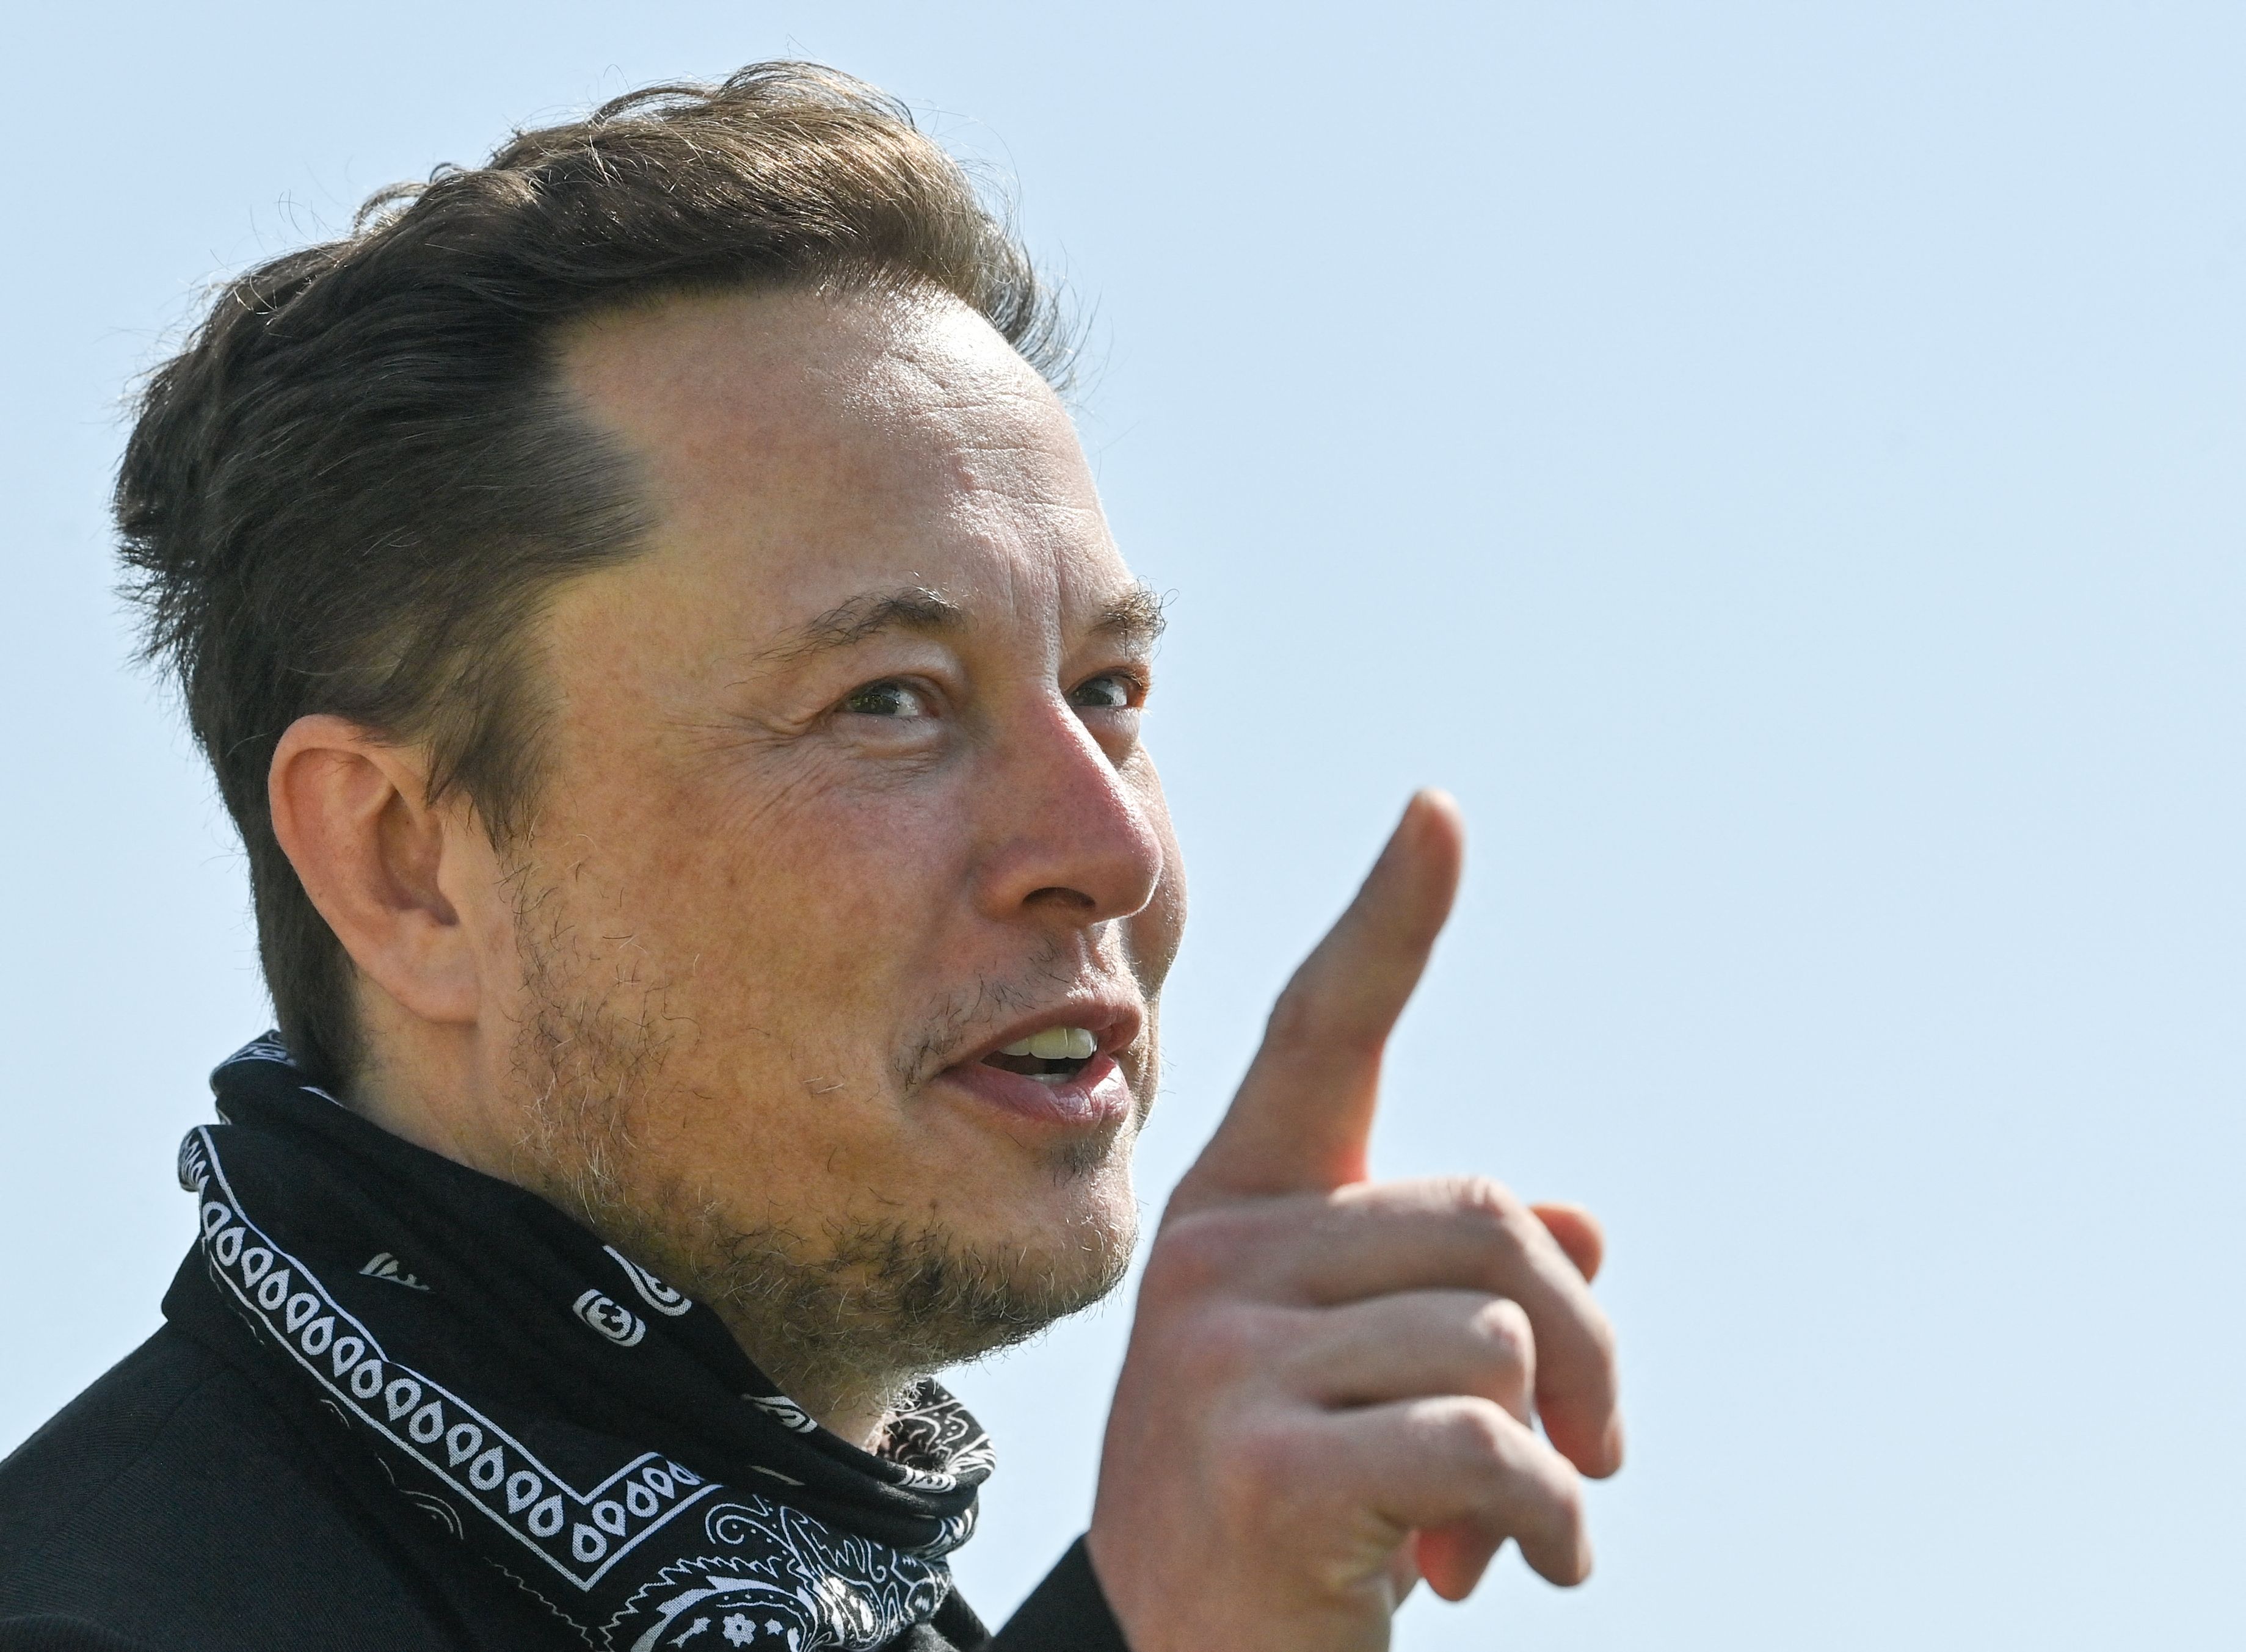 Elon Musk said SpaceX is ready to send humans to the moon "probably